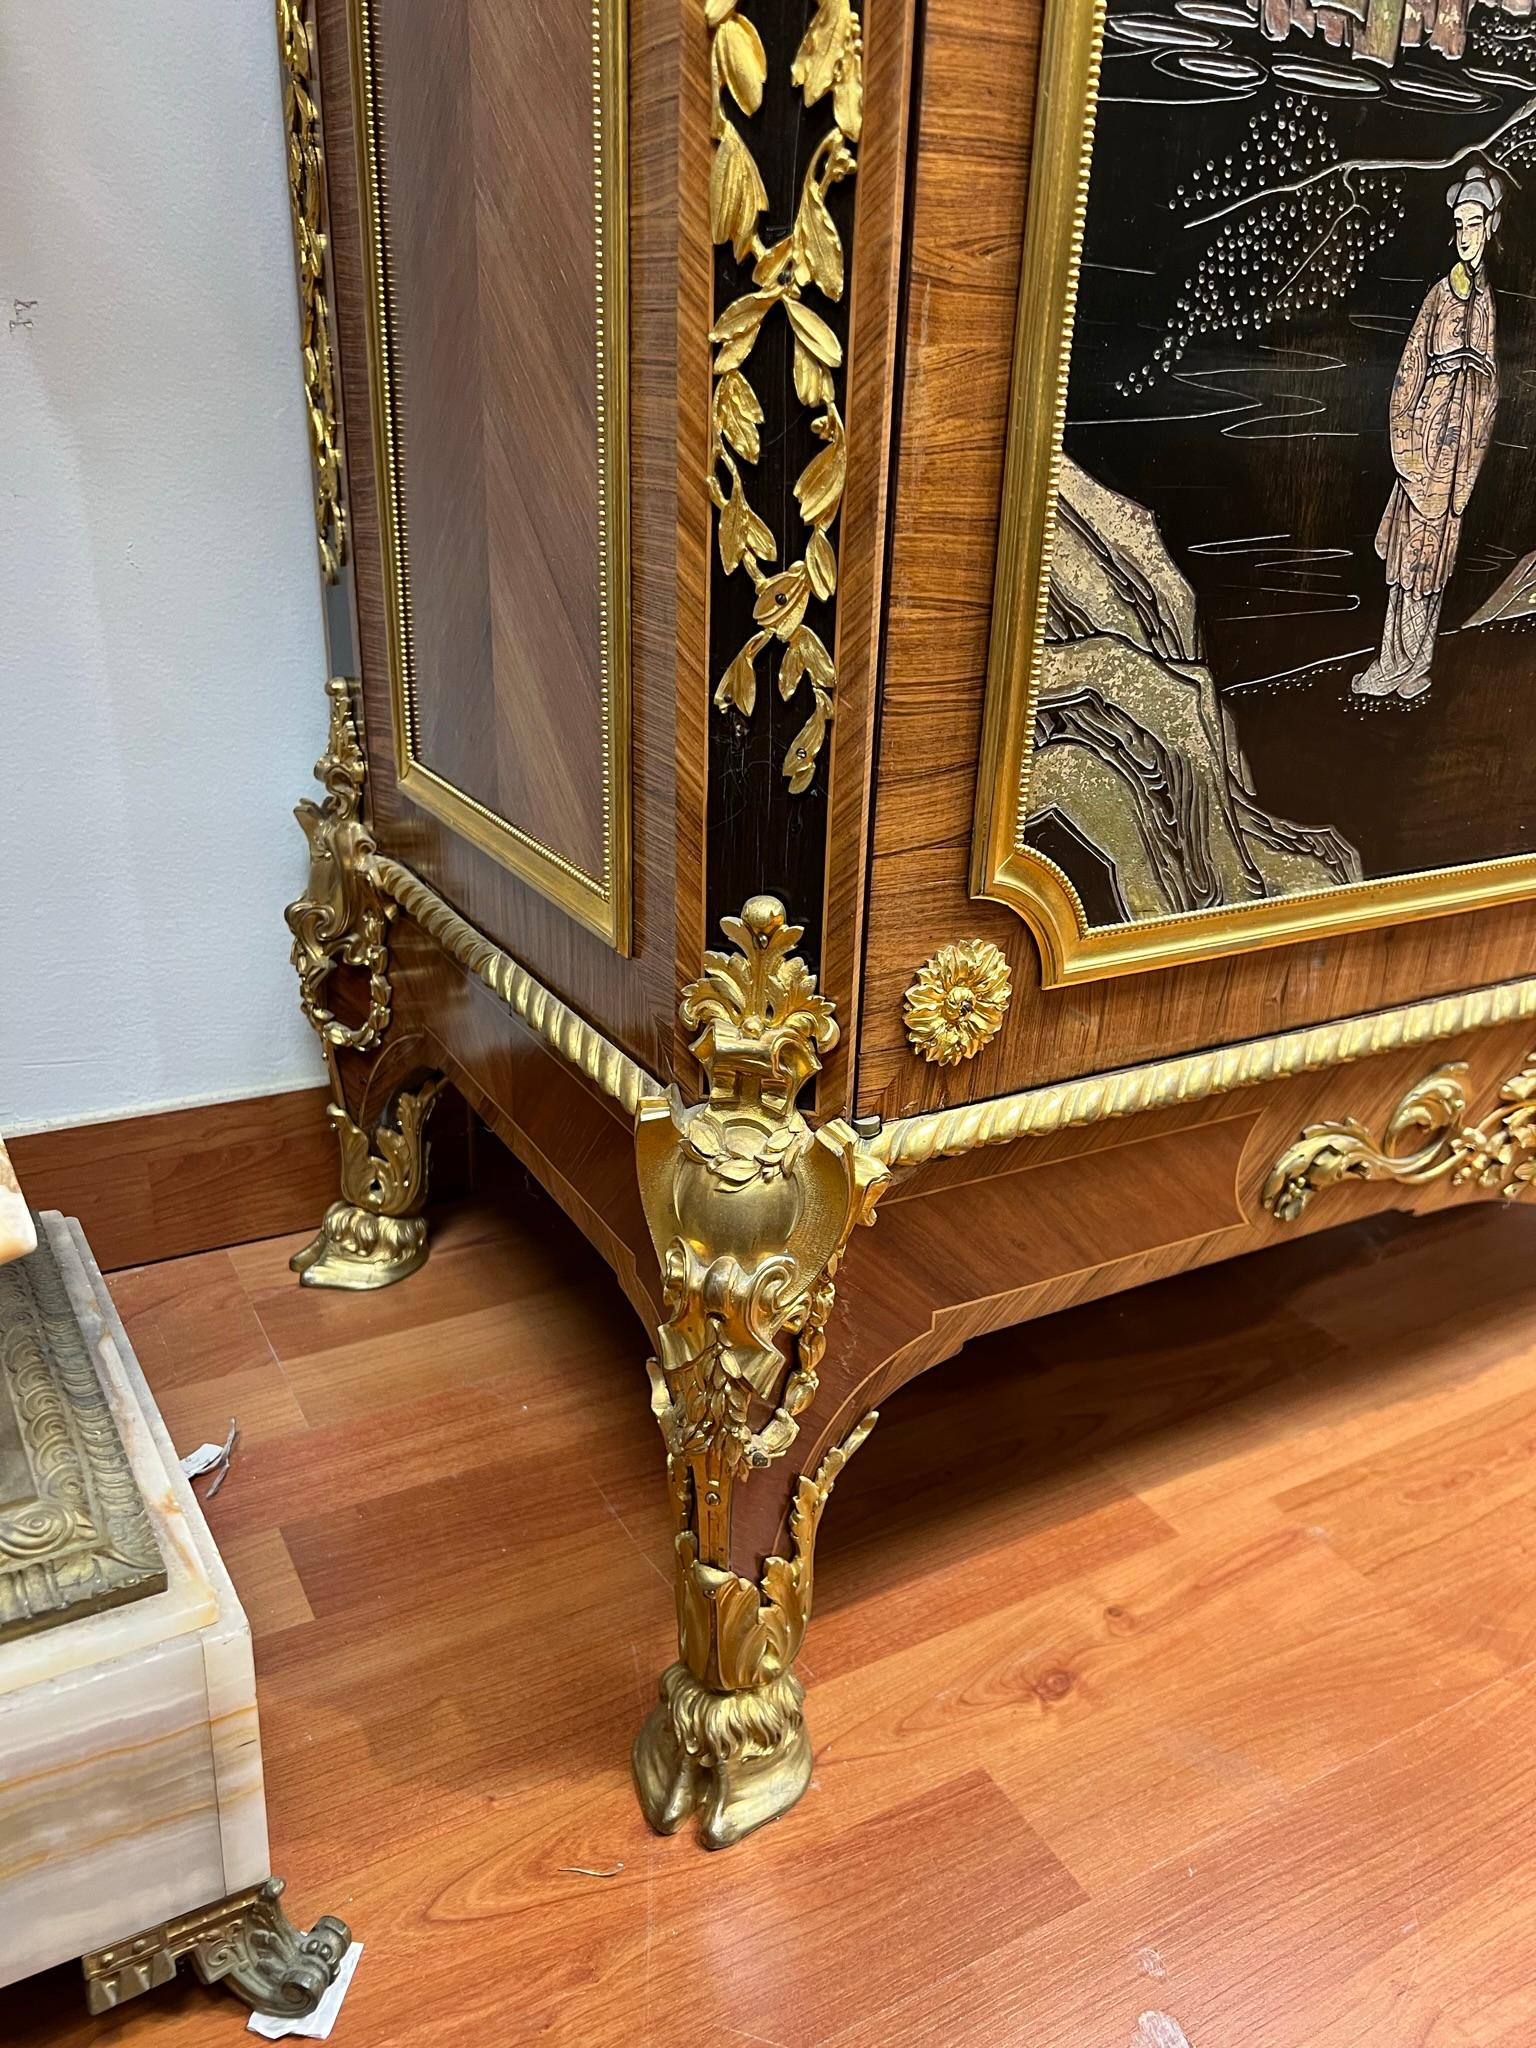 Bronze French Chinoiserie Side Cabinet in Louis XVI Style with Coromandel Panels c1900